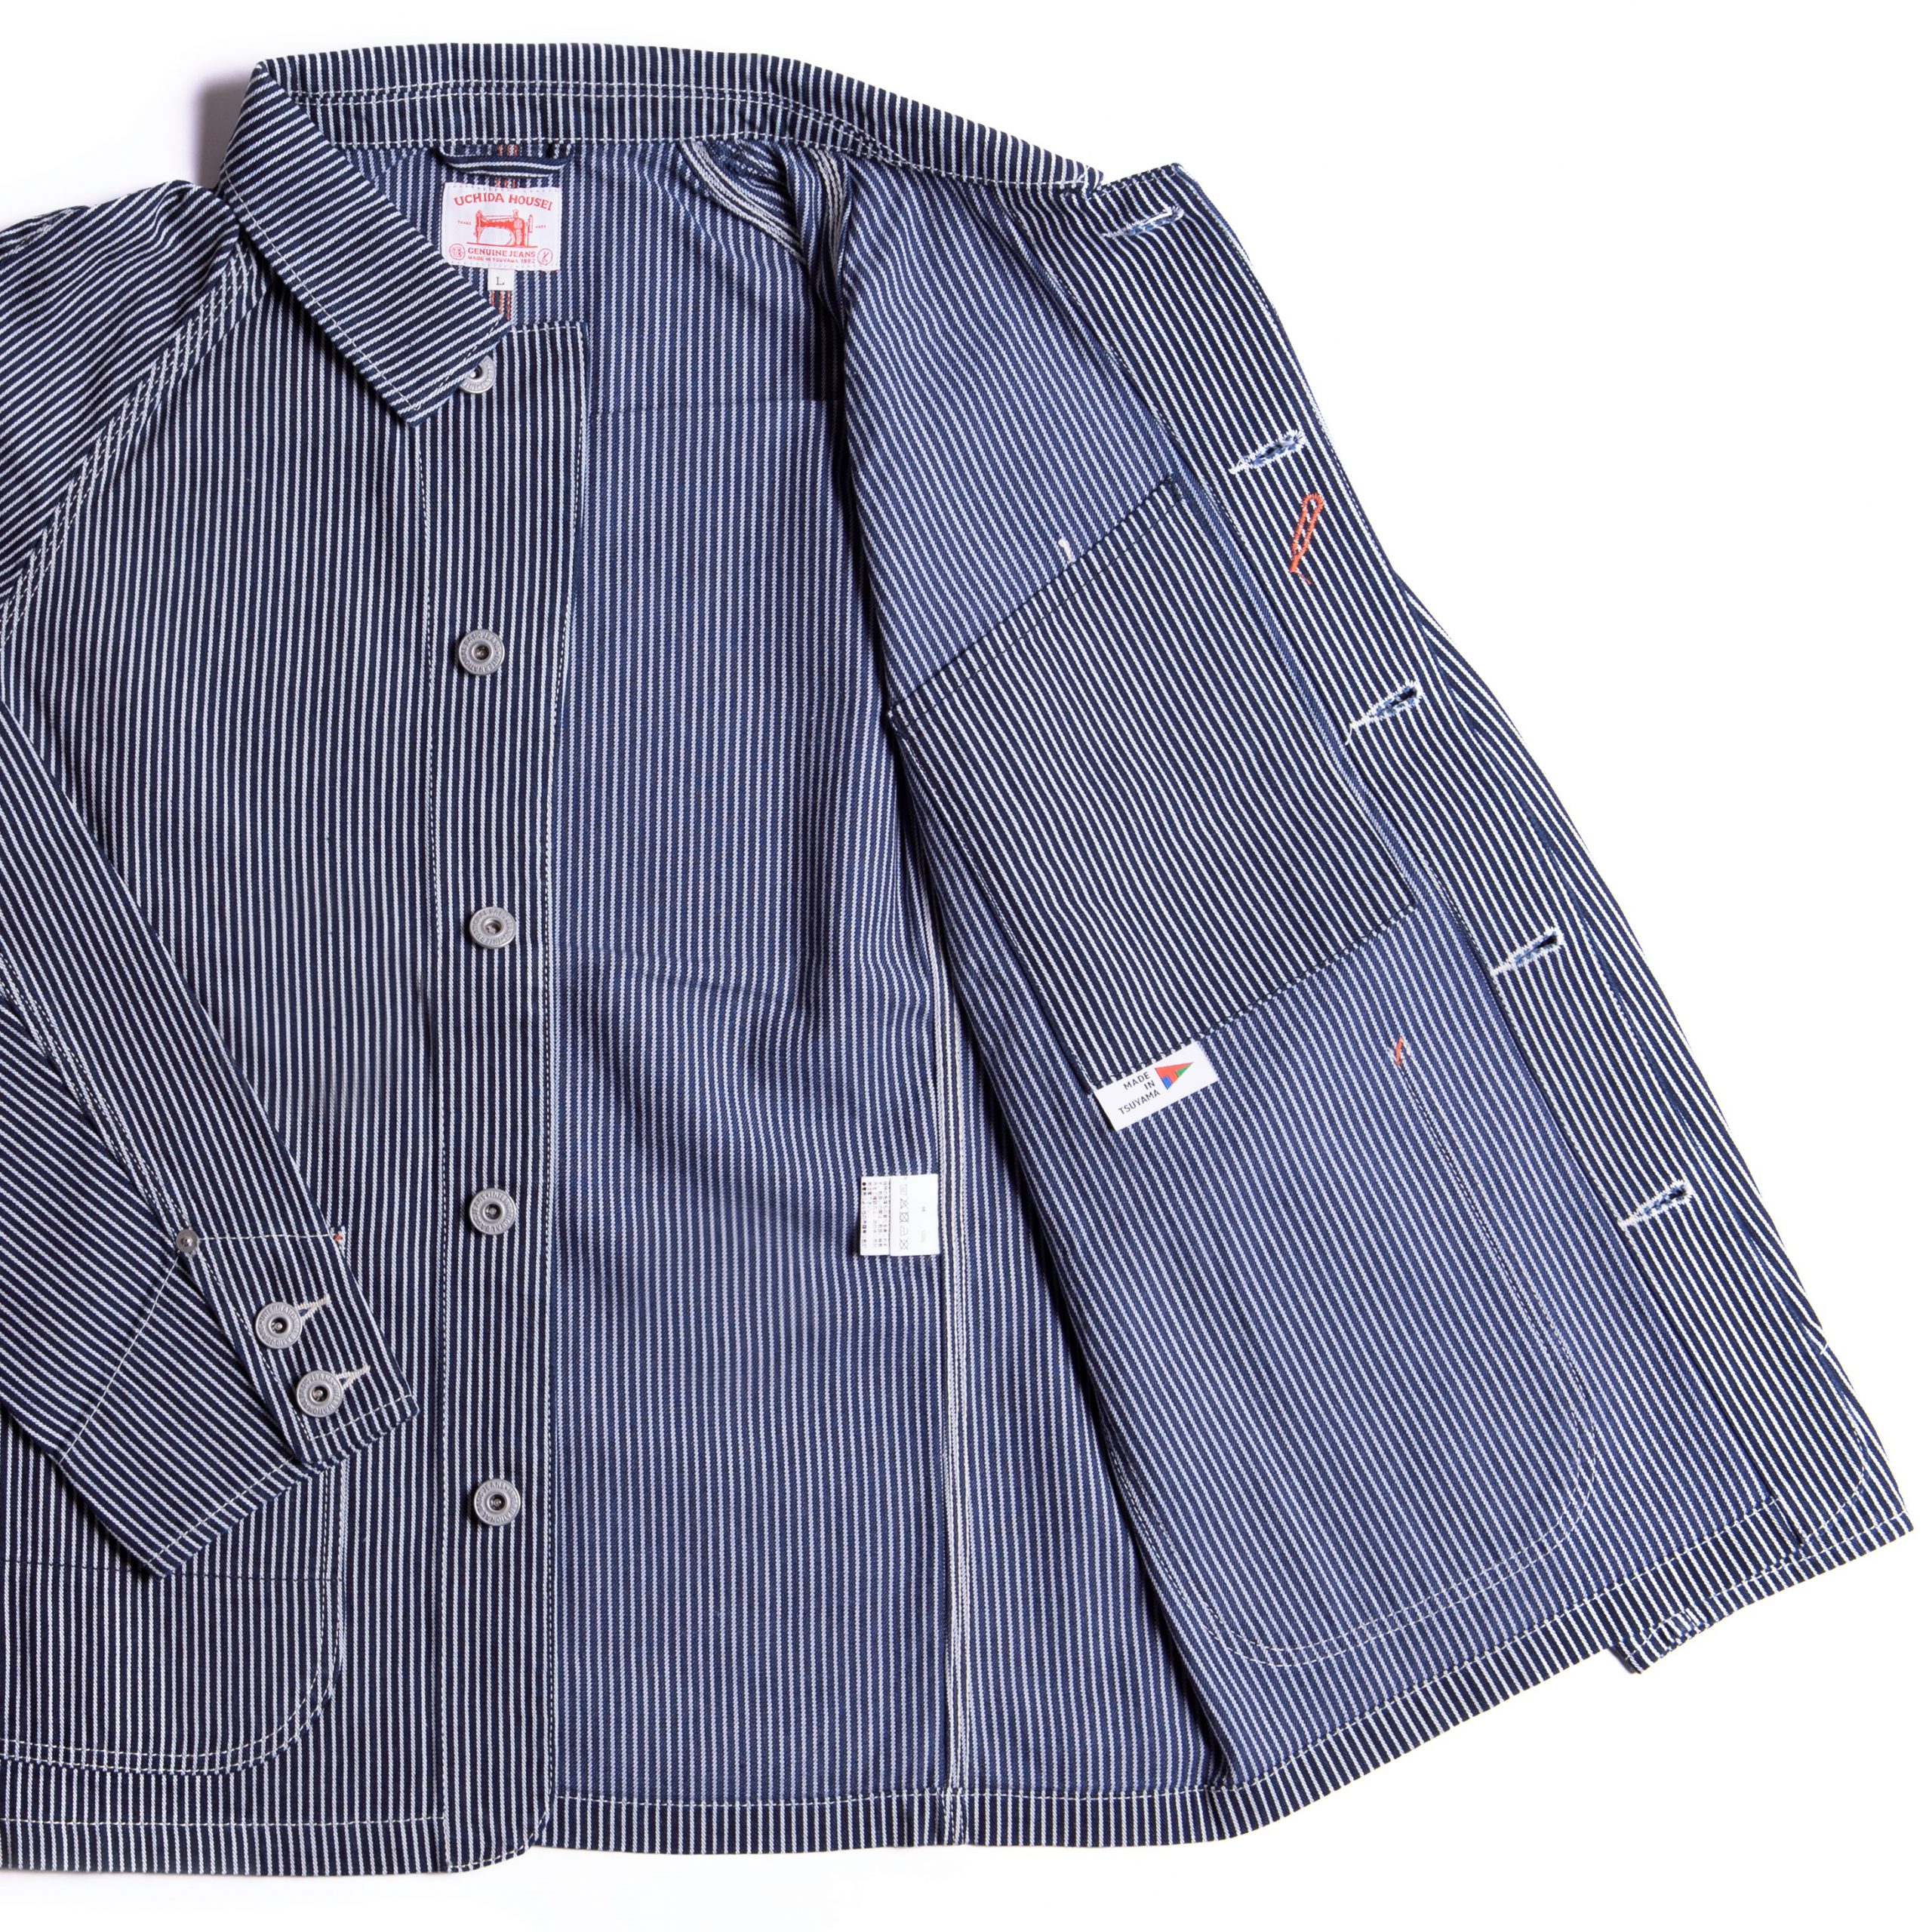 COVERALL HICKORY【カバーオール ヒッコリー】